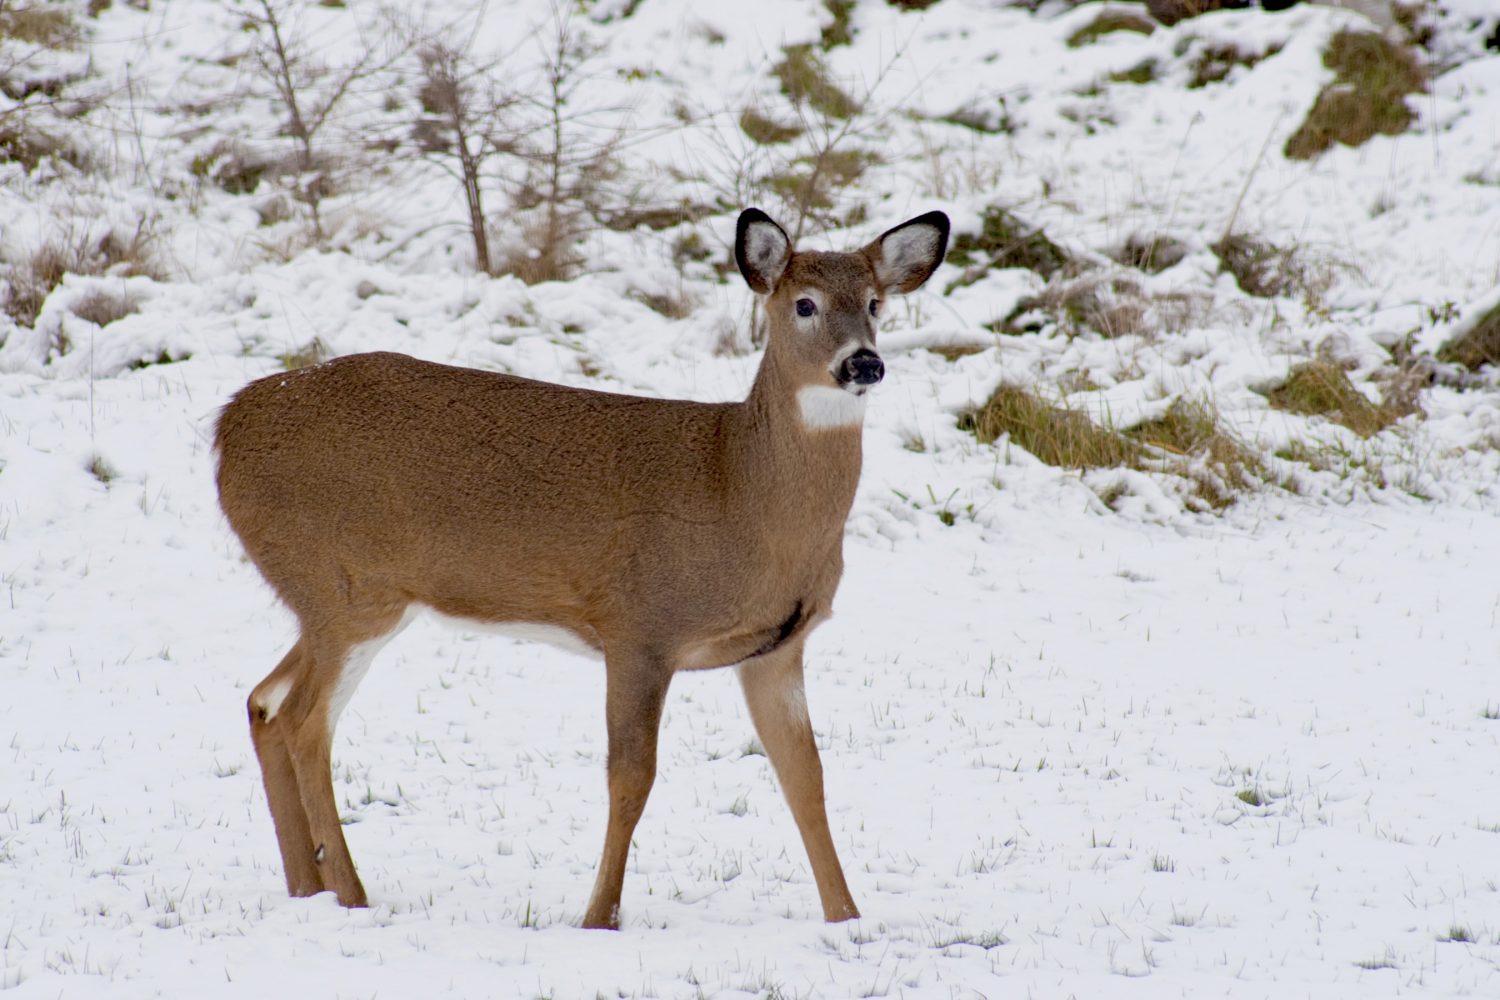 Deadline to submit comments for 2022 Deer Season extended to April 17